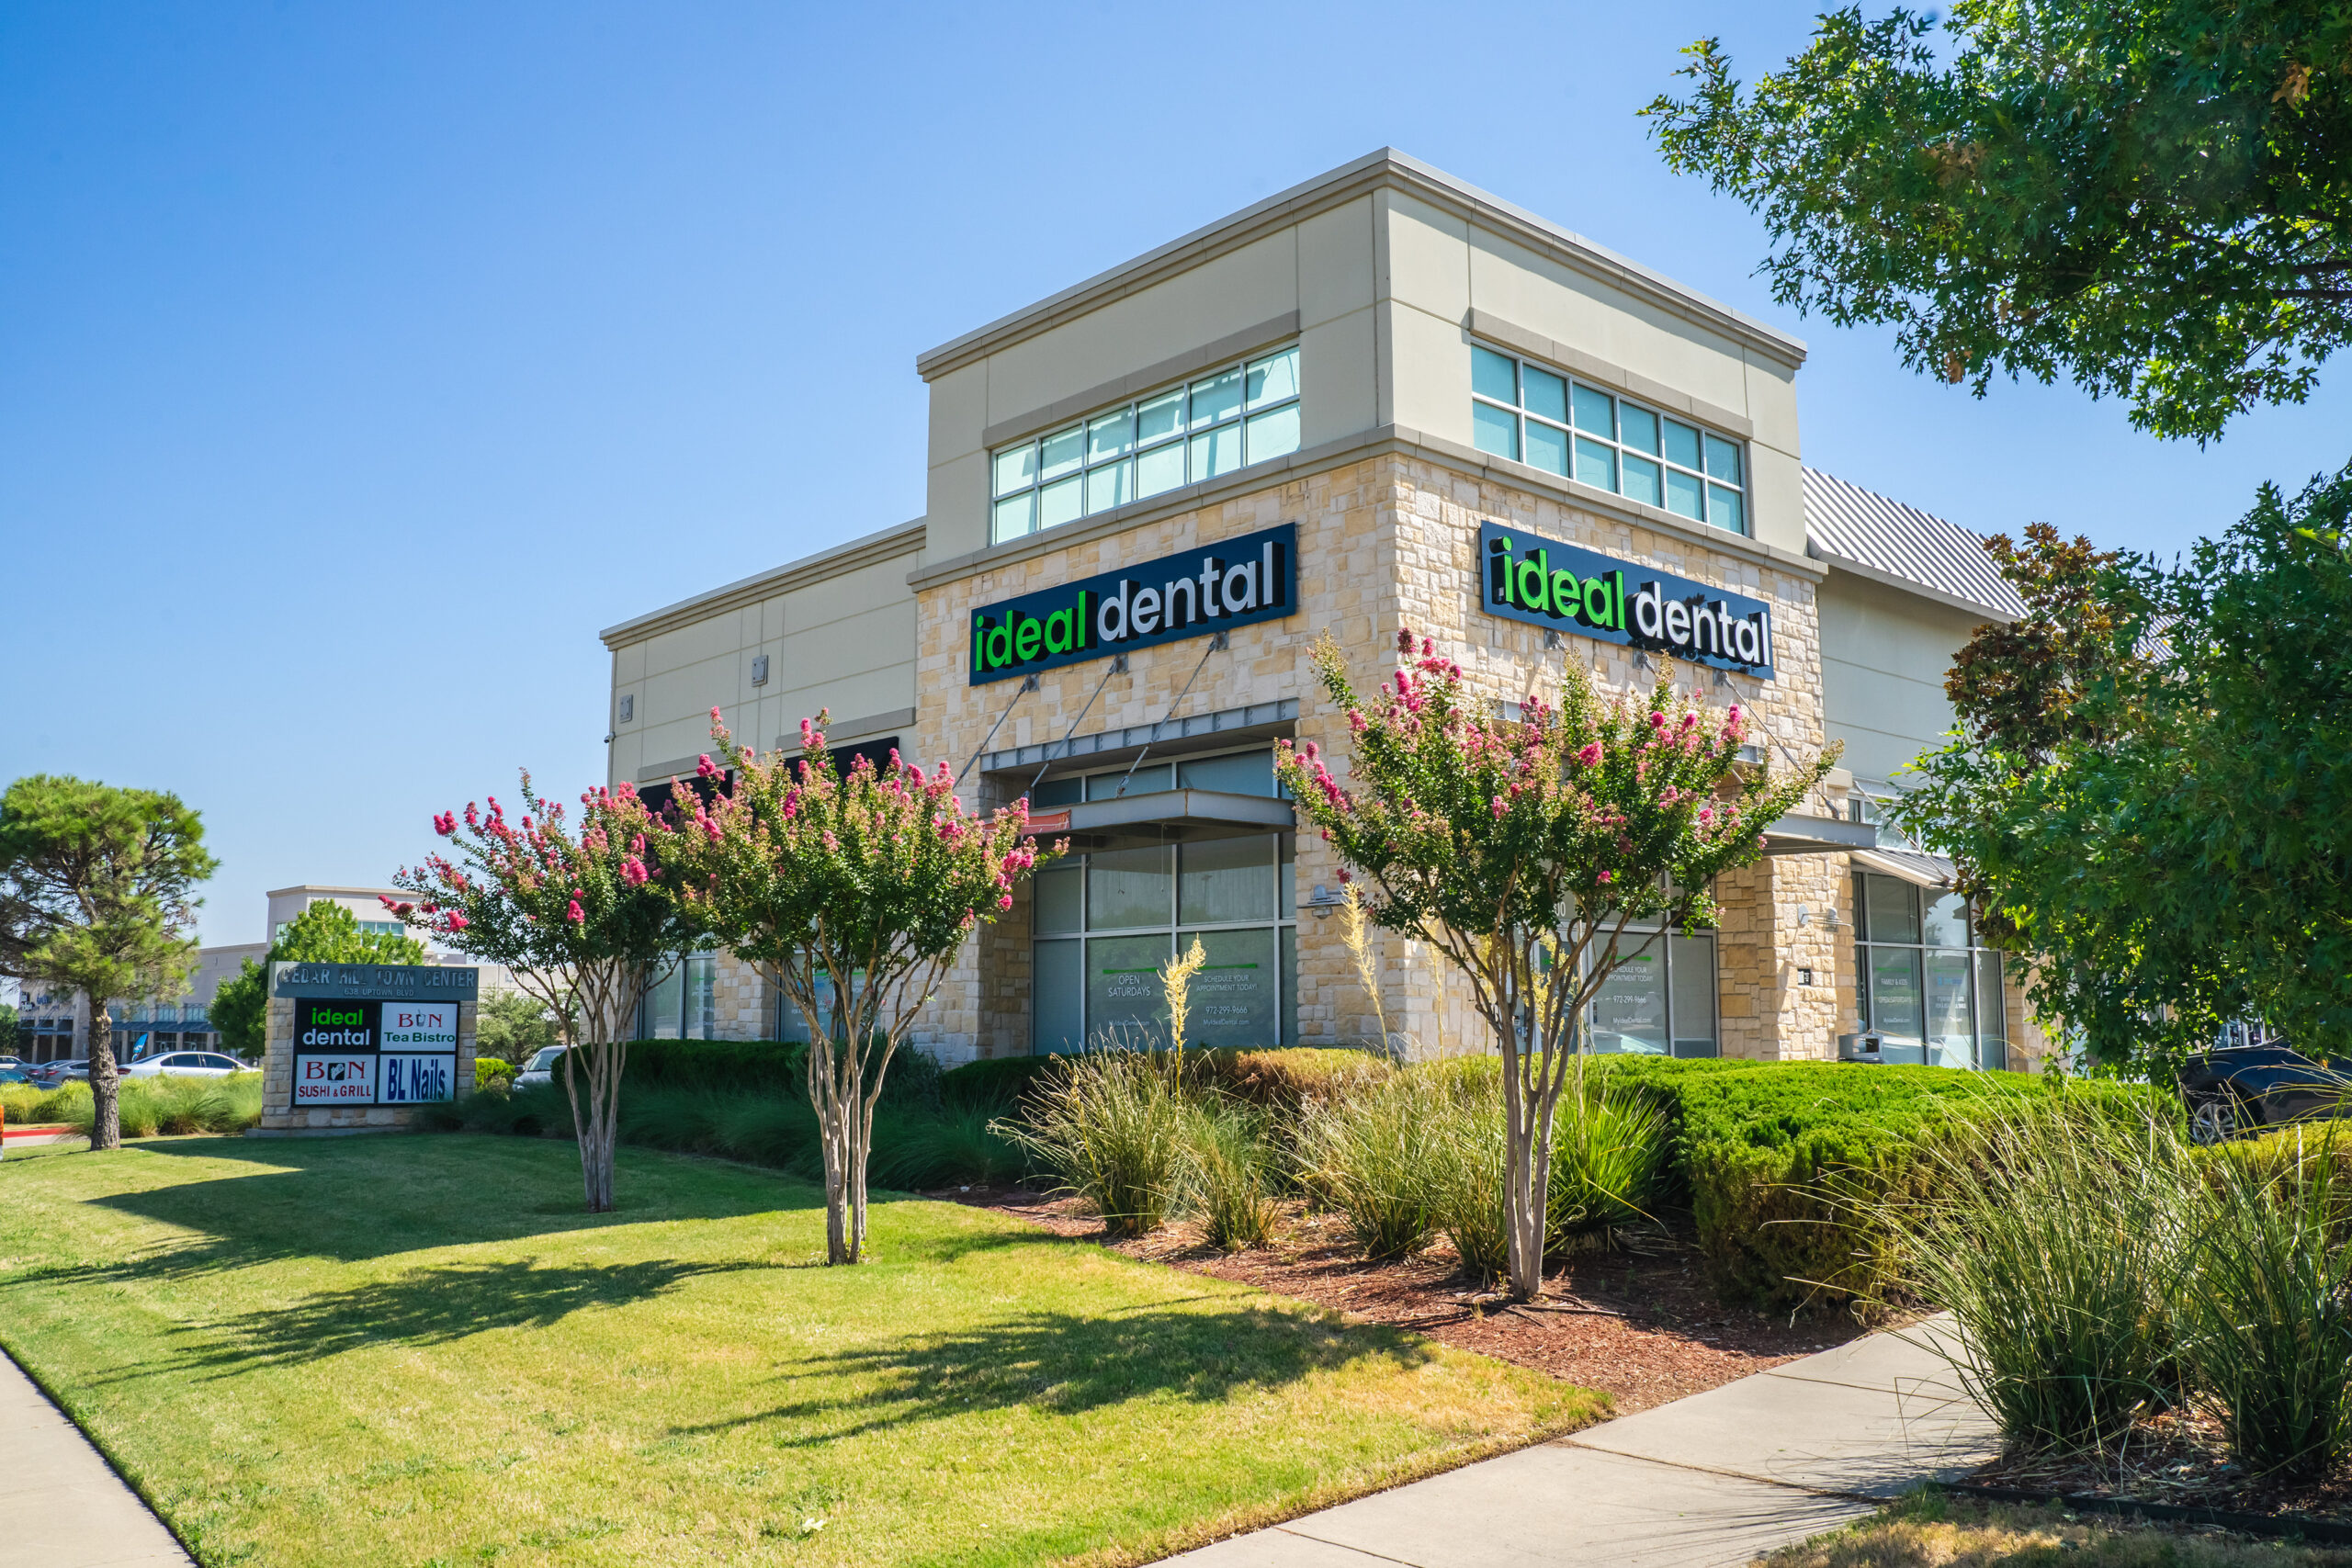 Ideal Dental office building exterior with flowering trees